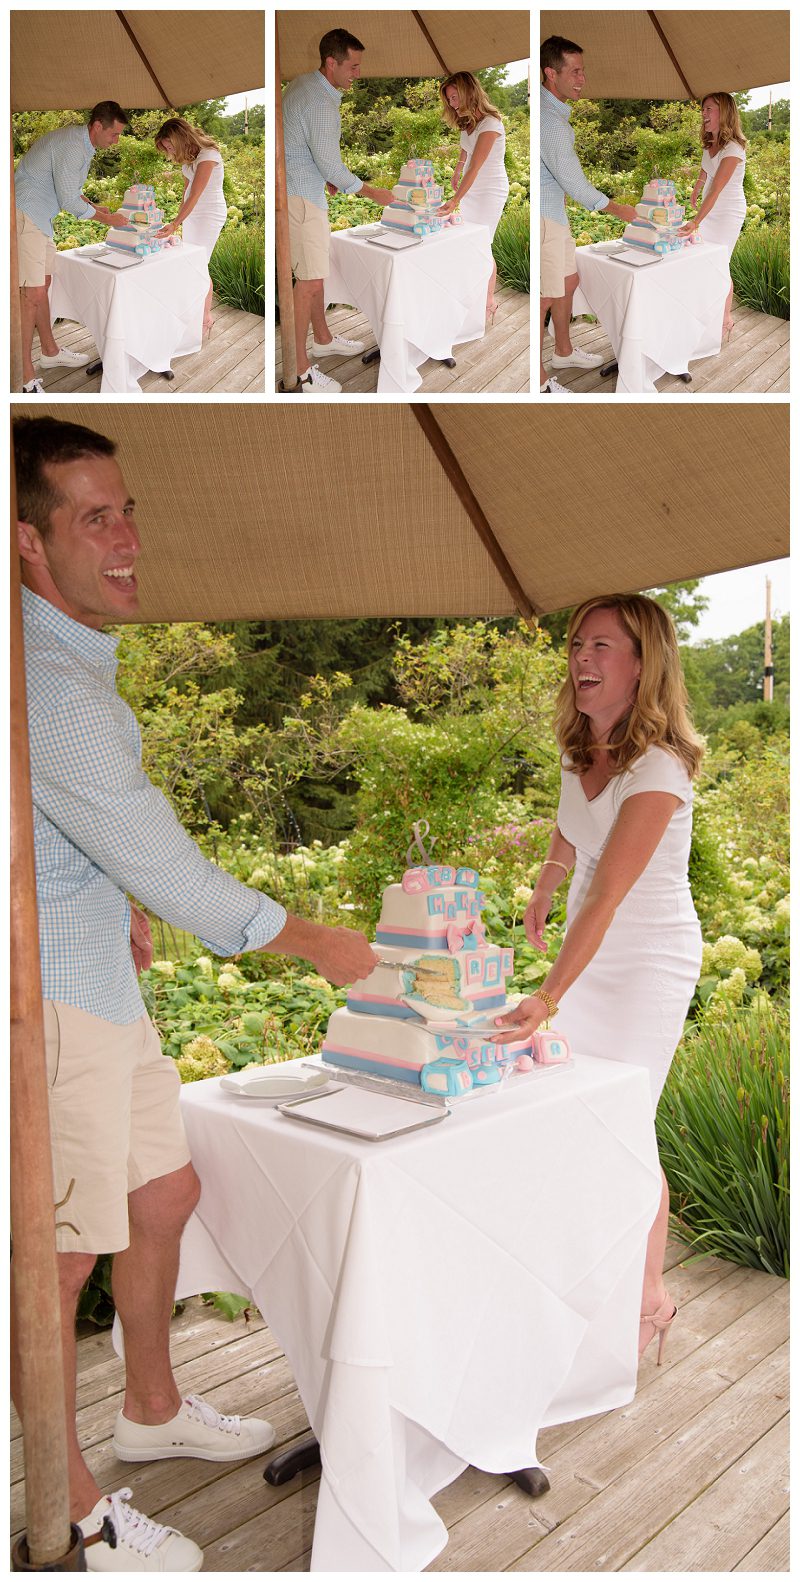 gender-reveal-party-cake-cutting